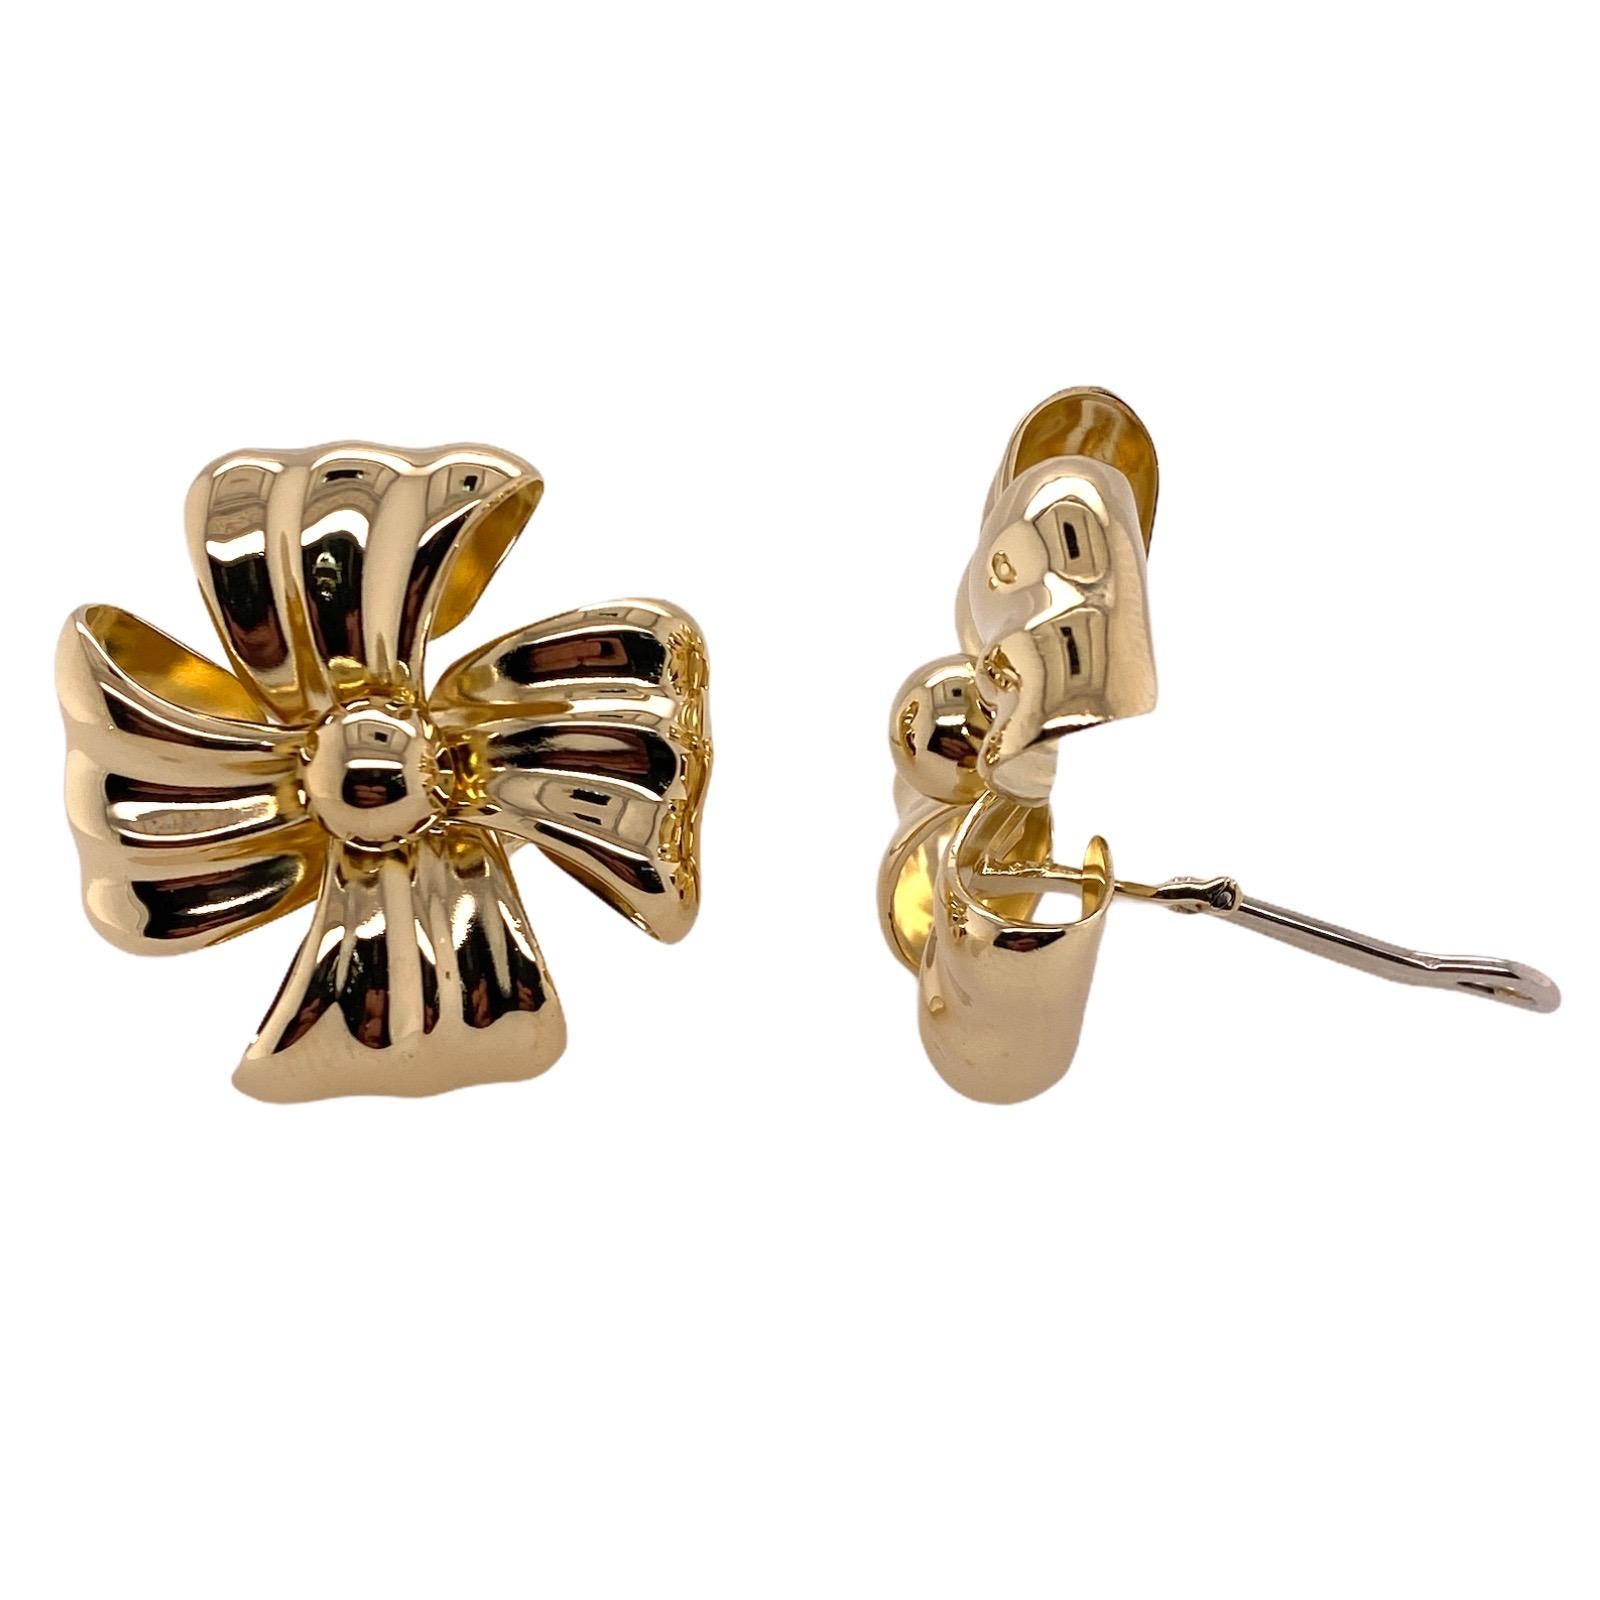 Italian ribbon earrings fashioned in 18 karat yellow gold. The earrings, circa 1970's,  measure 1.25 x 1.25 inches and feature clip backs (post can be added). 